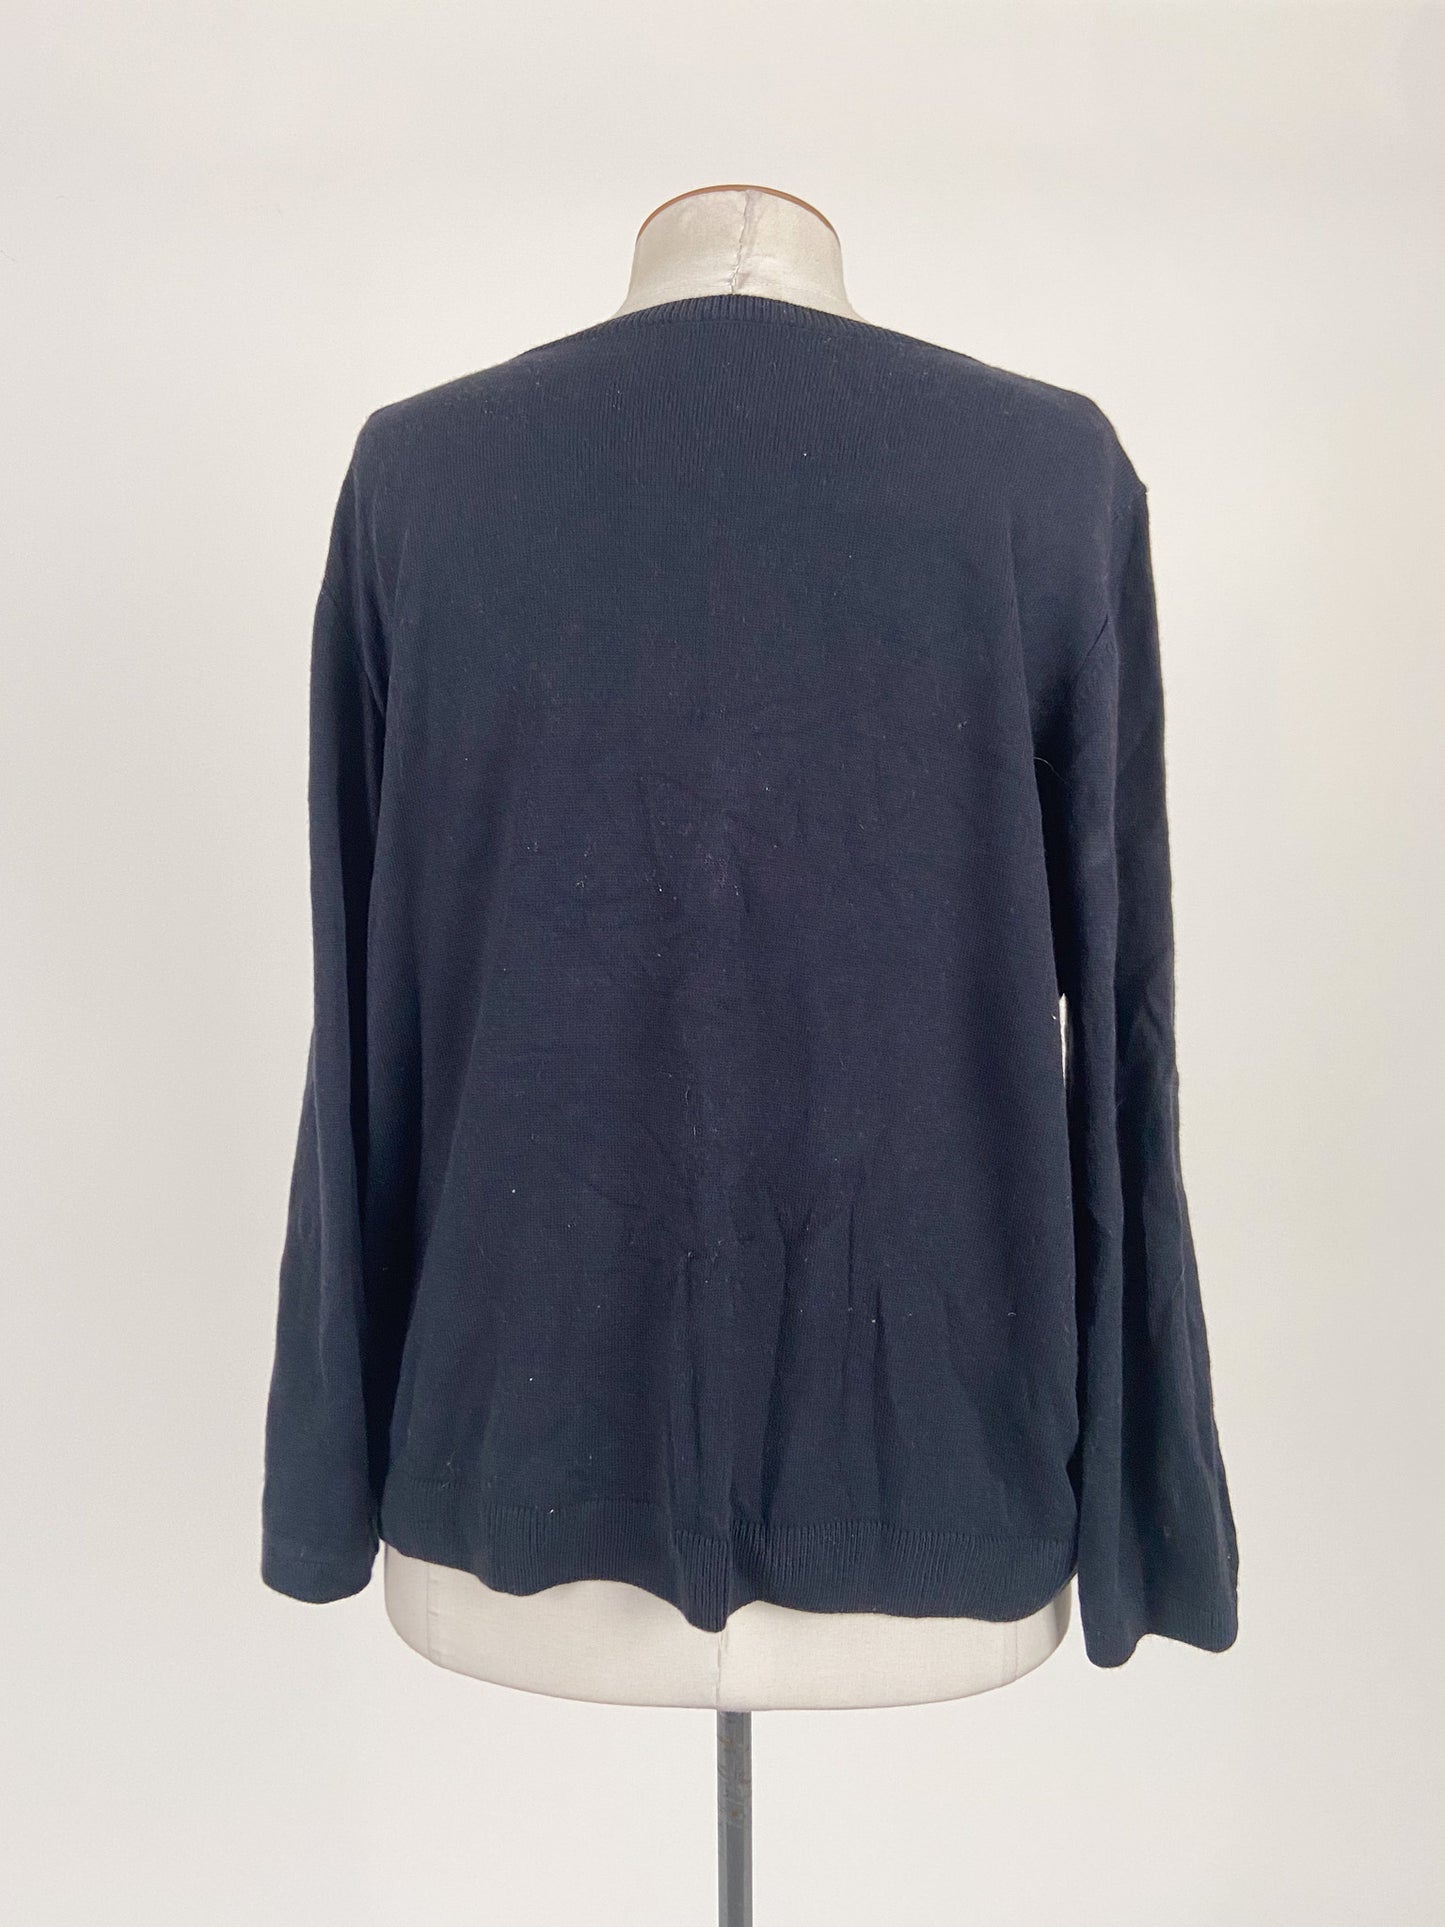 Marks & Spencer | Navy Casual Jumper | Size XXL